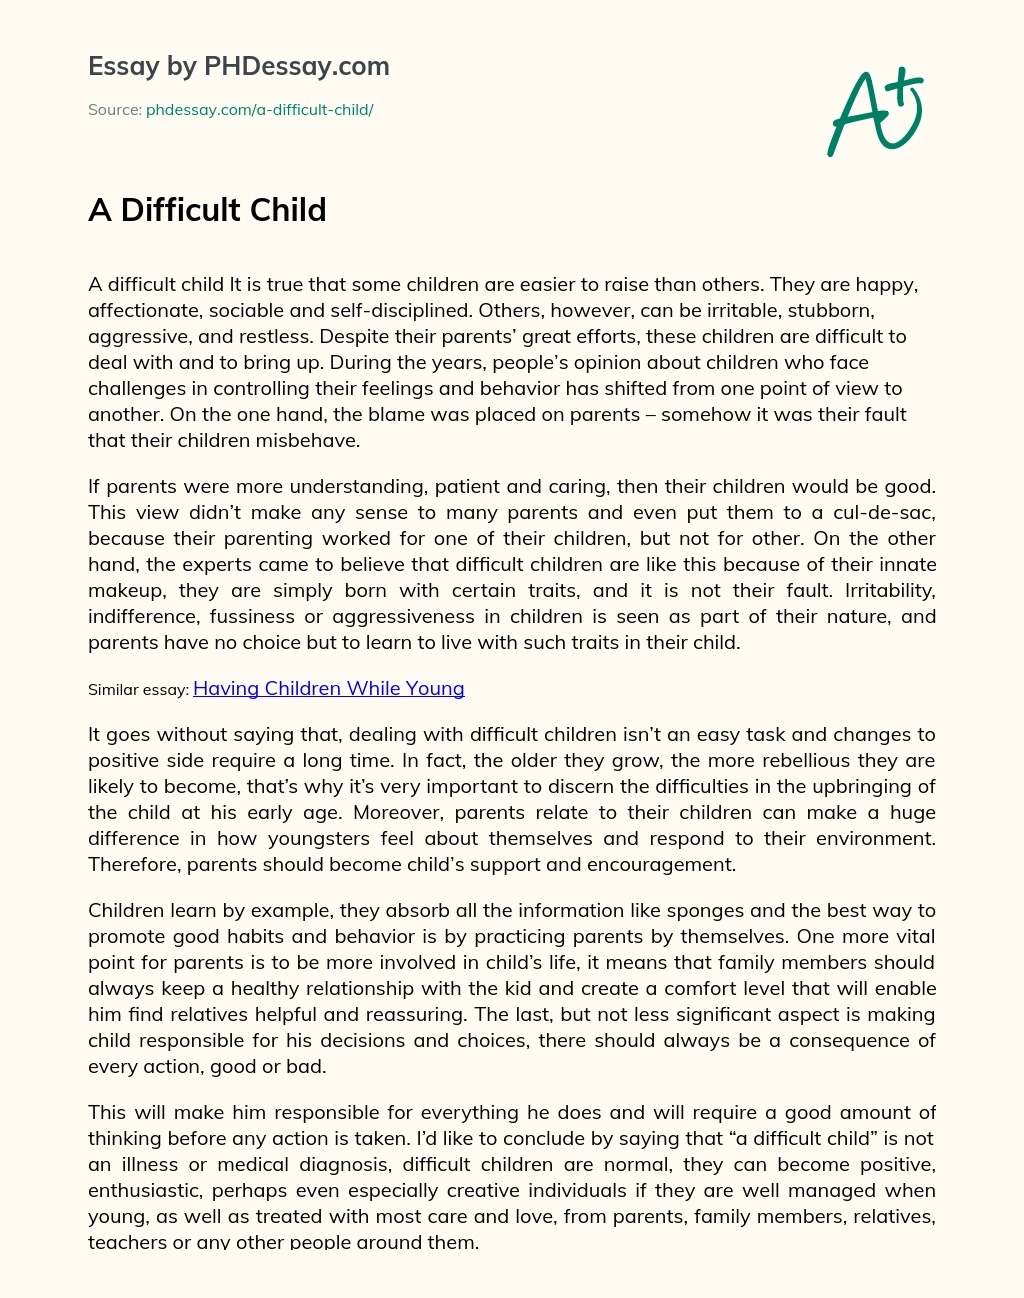 A Difficult Child essay